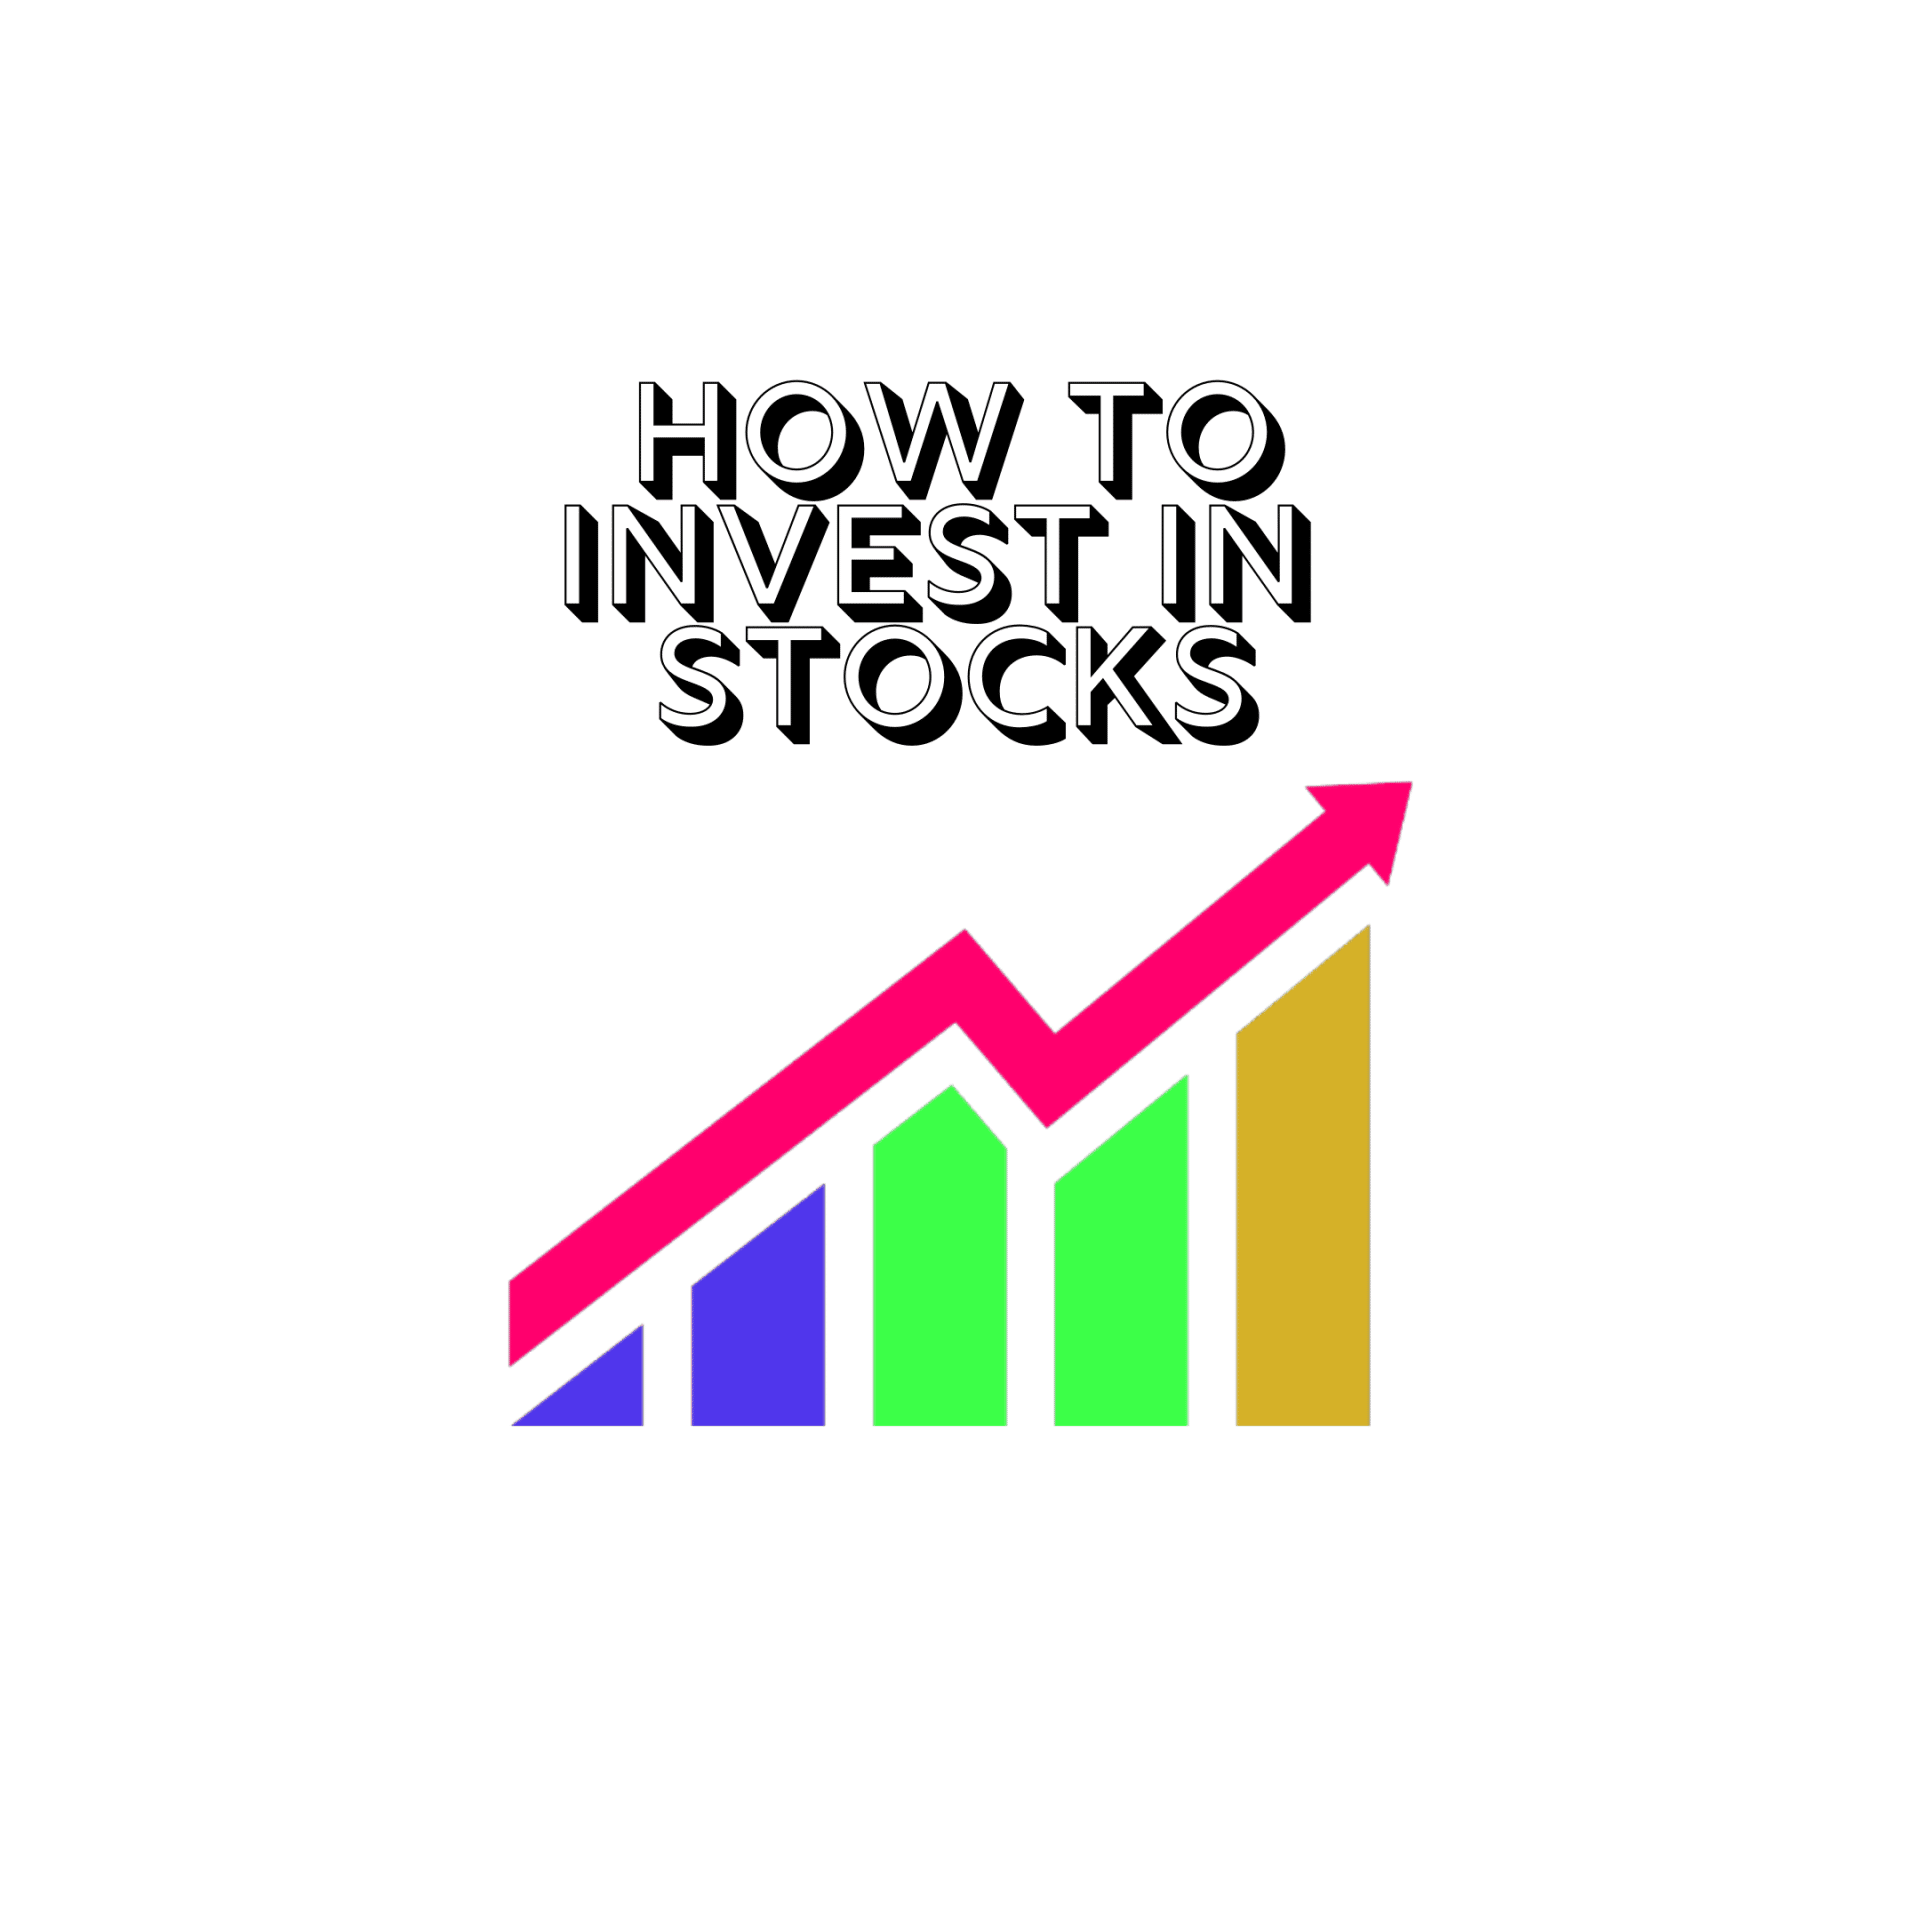 HOW TO INVEST IN STOCKS